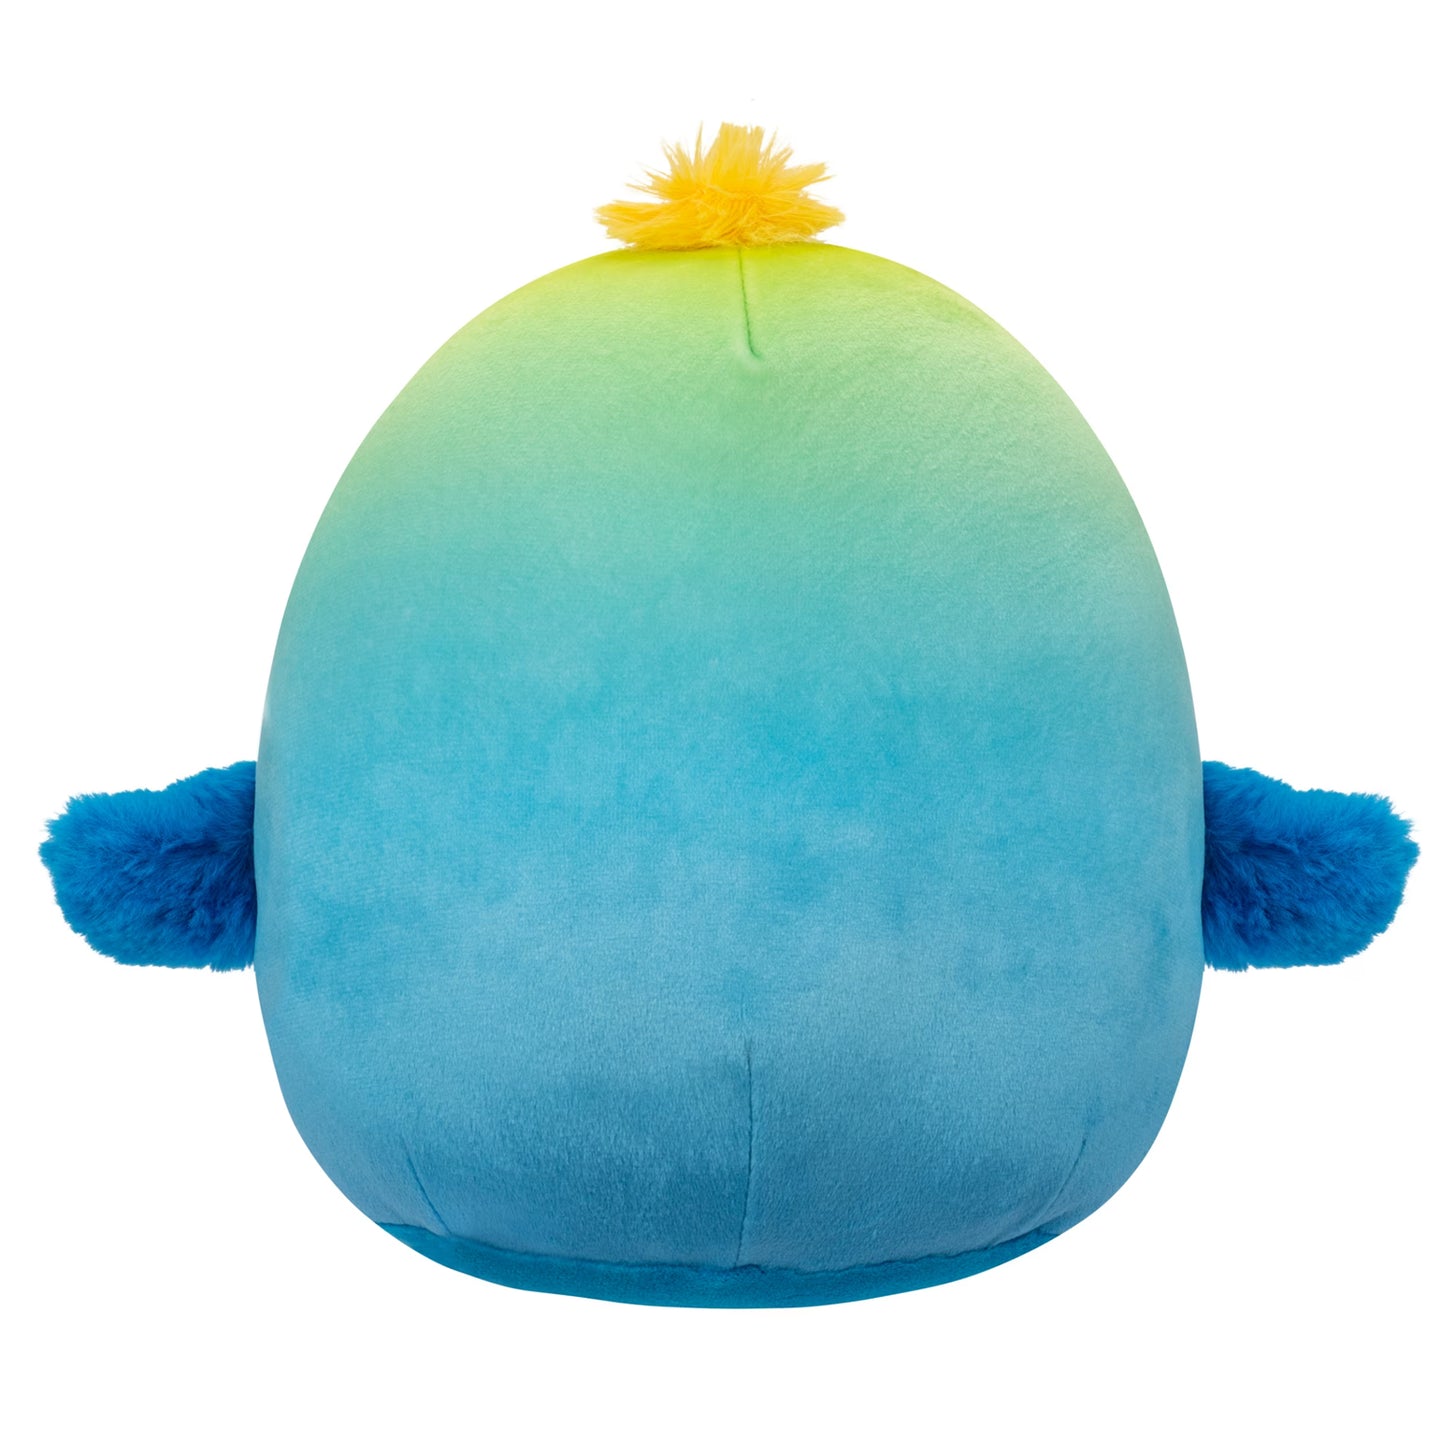 Squishmallows - Little Plush 7.5" Baptise - Blue and Yellow Macaw